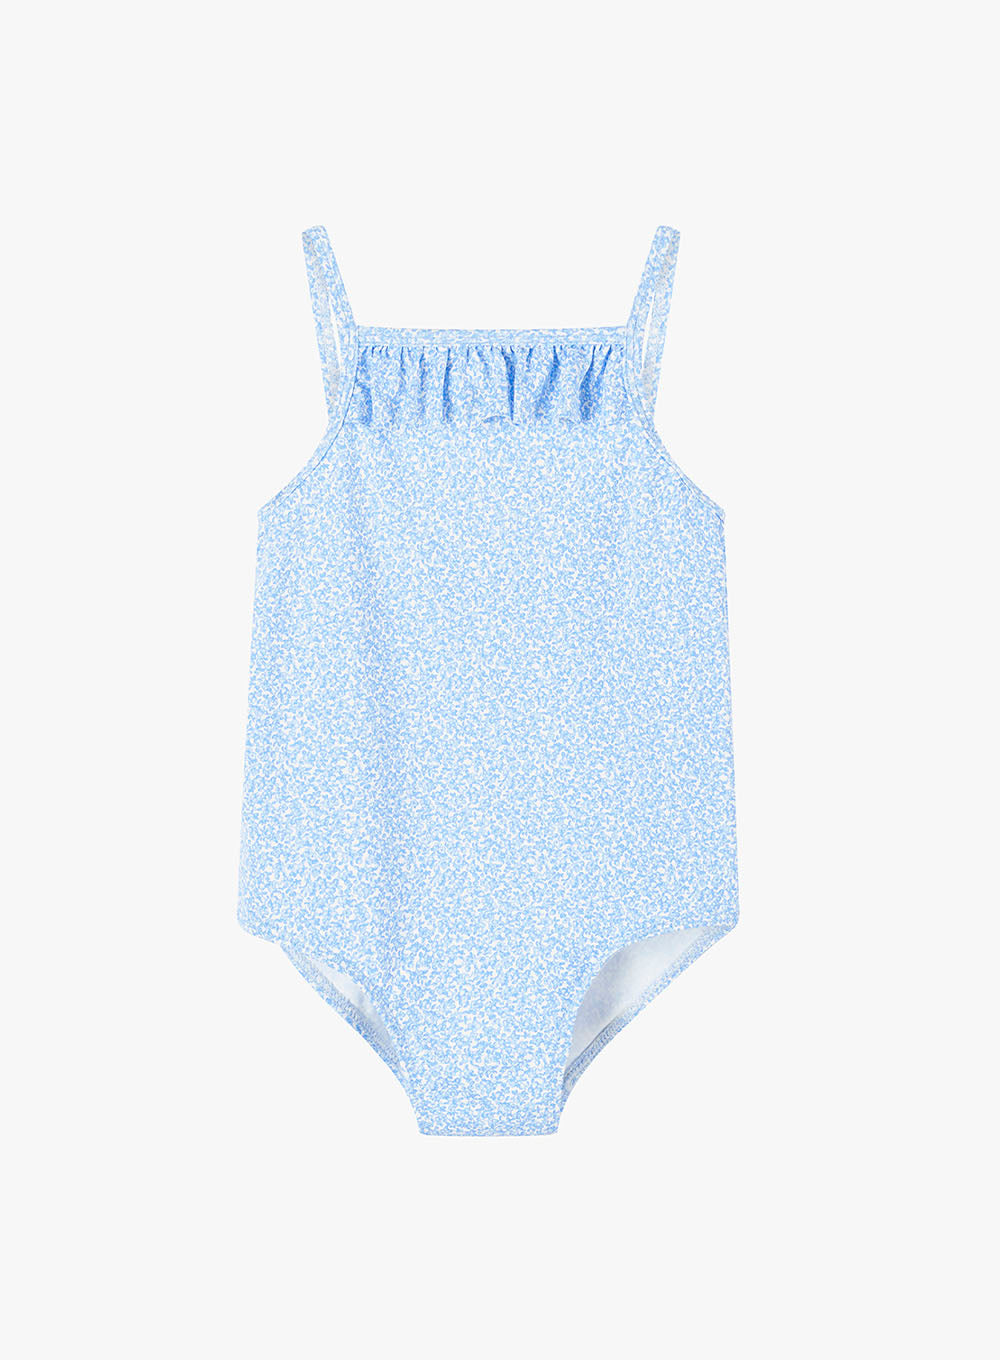 Little Frill Swimsuit in Blue Miniature Floral